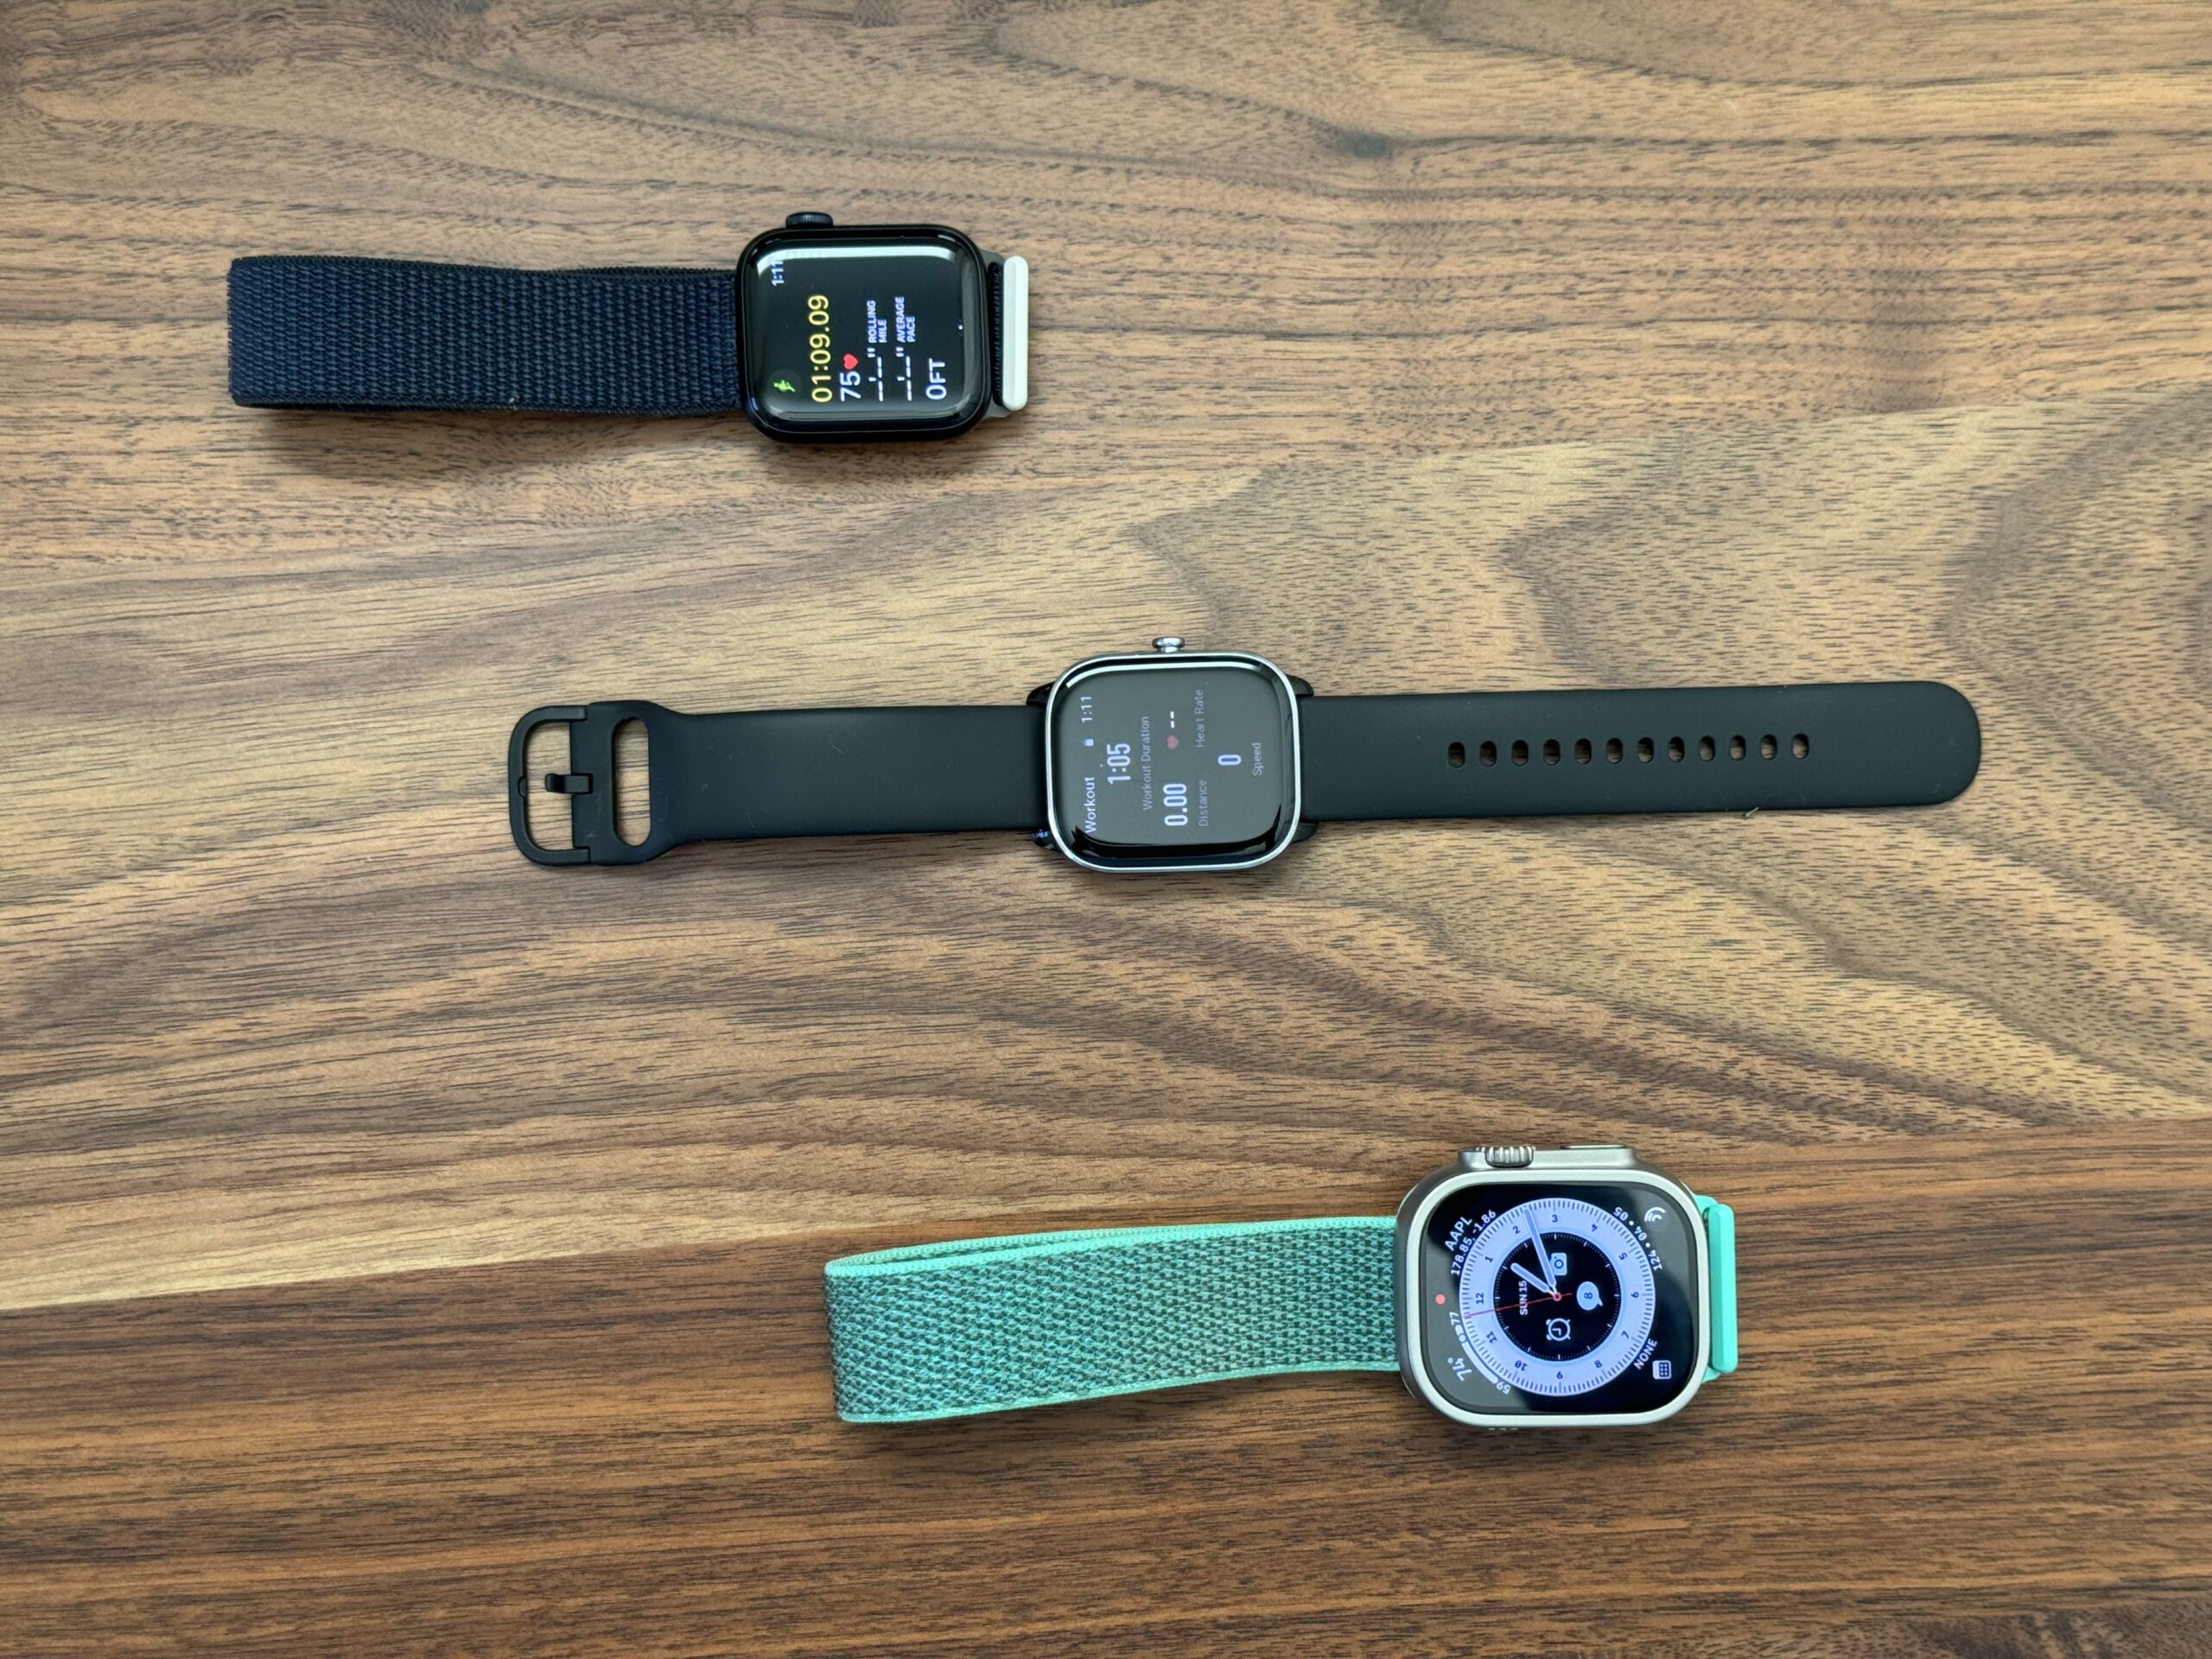 Amazfit GTS 4 Mini review: Fitness tracker in smartwatch's